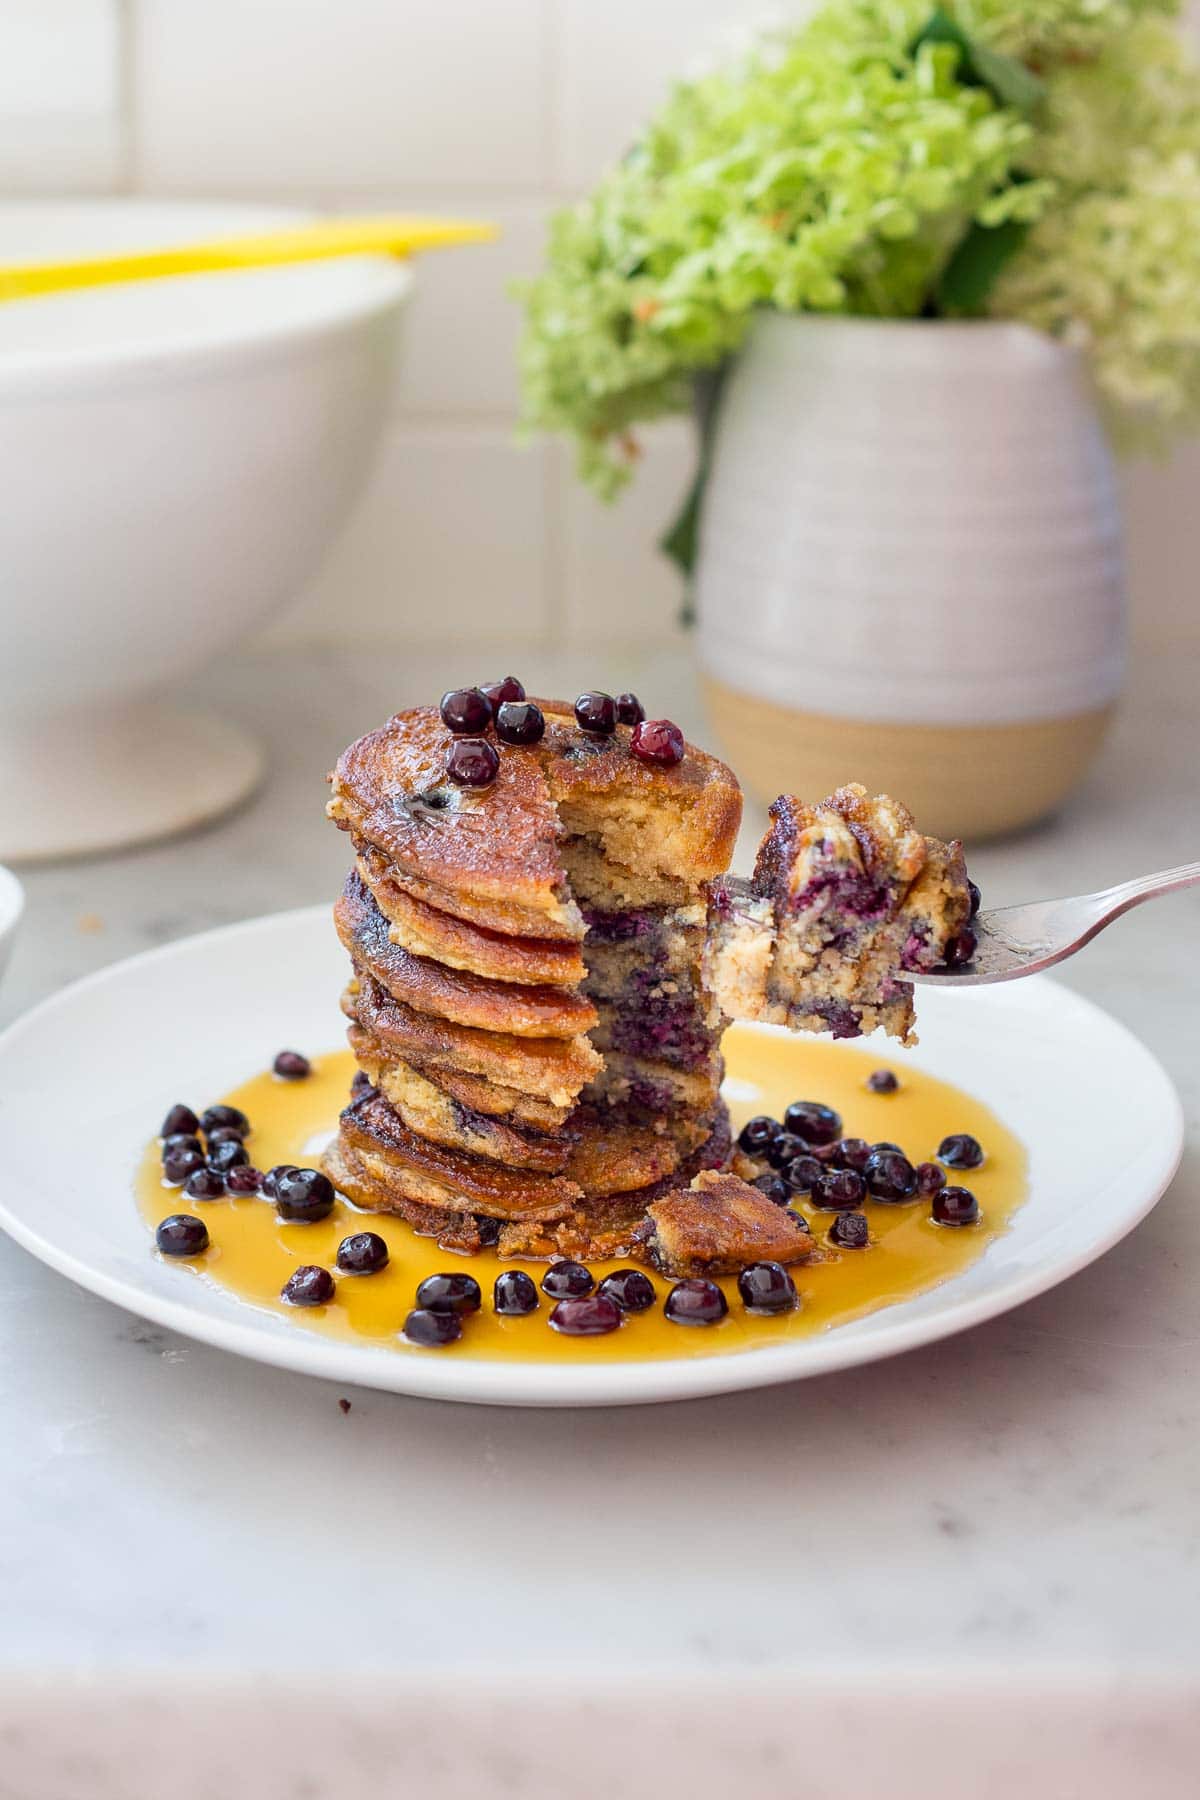 Almond Flour Pancakes with maple syrup and fresh berries- a delicious, one bowl, grain-free, gluten-free, paleo recipe for our favorite breakfast!